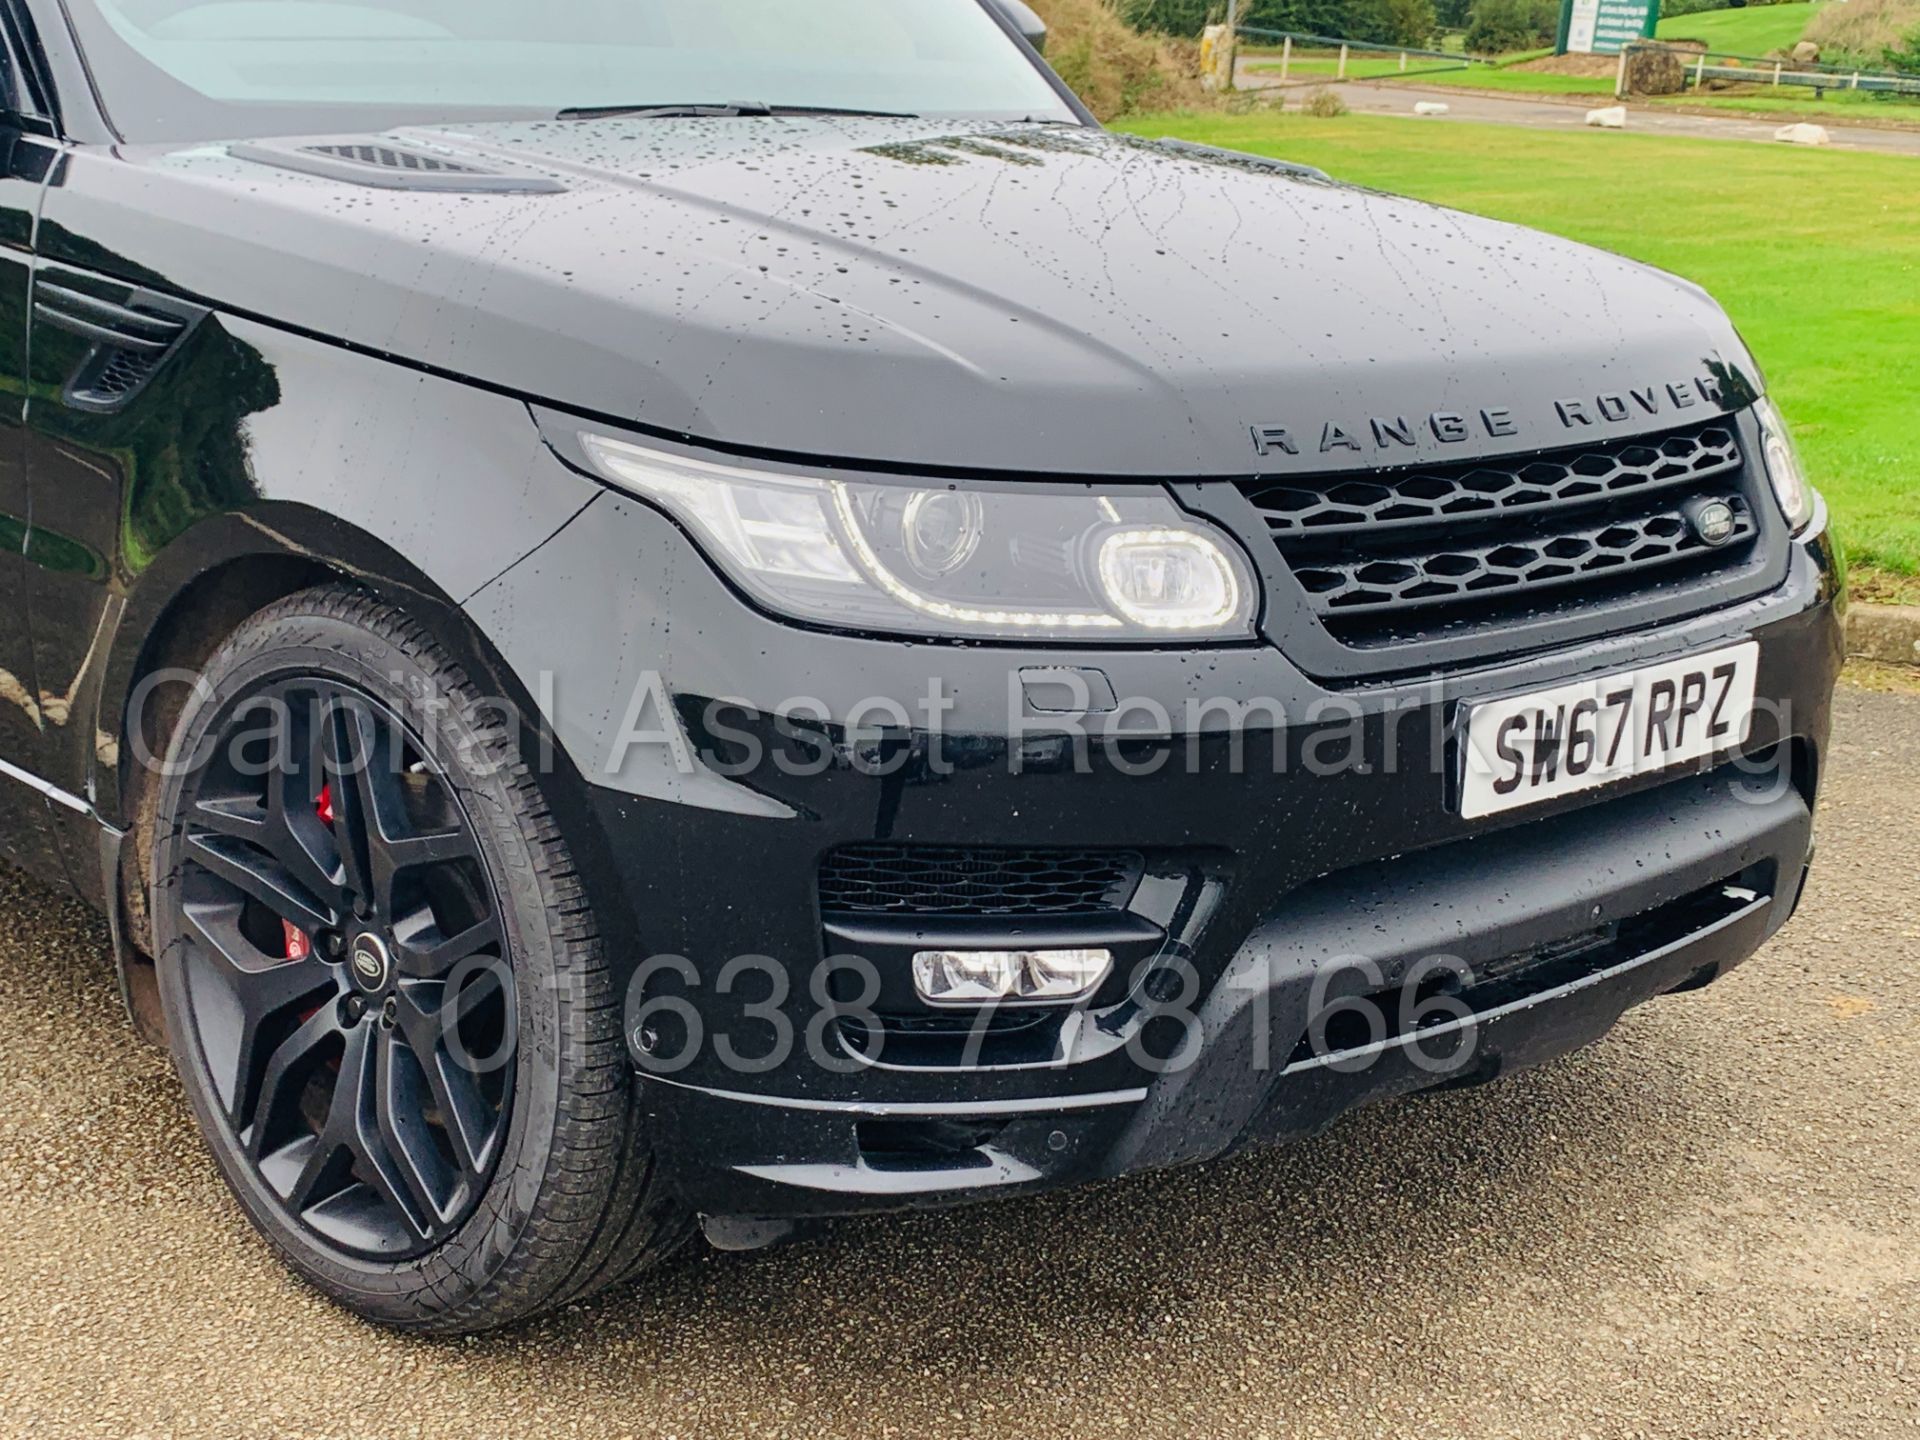 (ON SALE) RANGE ROVER SPORT *AUTOBIOGRAPHY DYNAMIC* (67 RG ) '3.0 SDV6 - 8S AUTO' **ULTIMATE SPEC** - Image 13 of 68